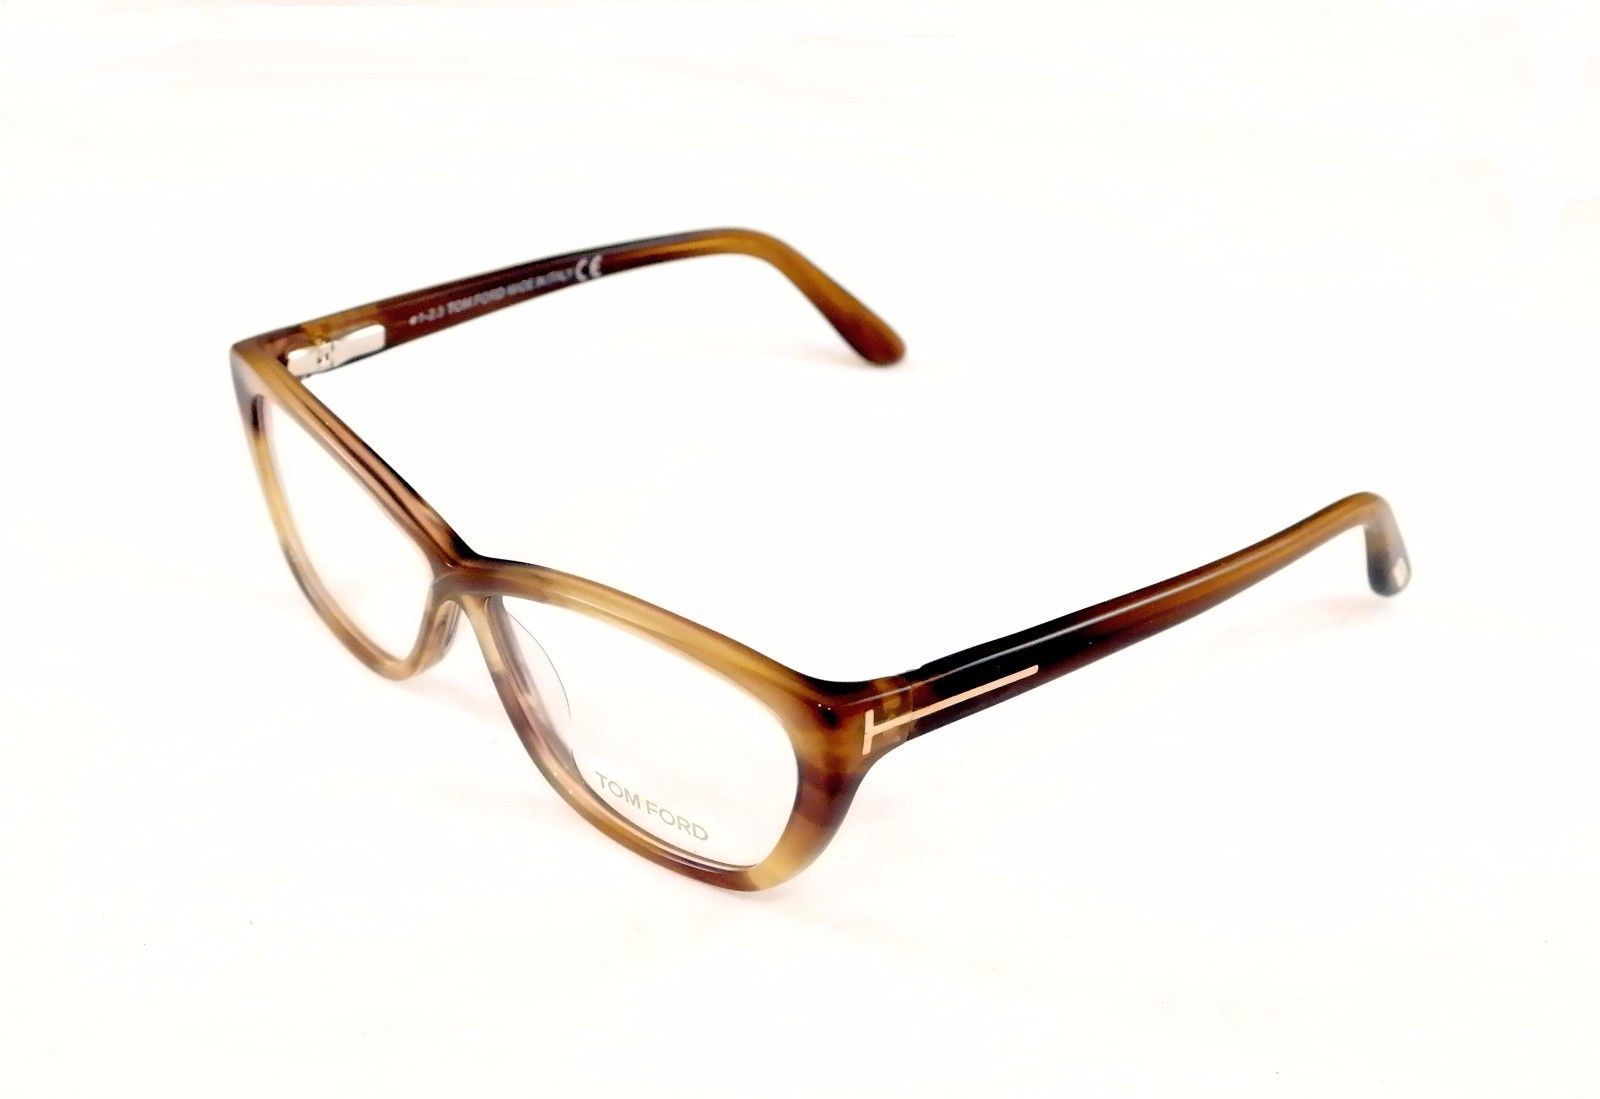 Tom Ford Authentic Eyeglasses Frame TF5227 050 Brown Gradient Plastic Italy Made - $133.62